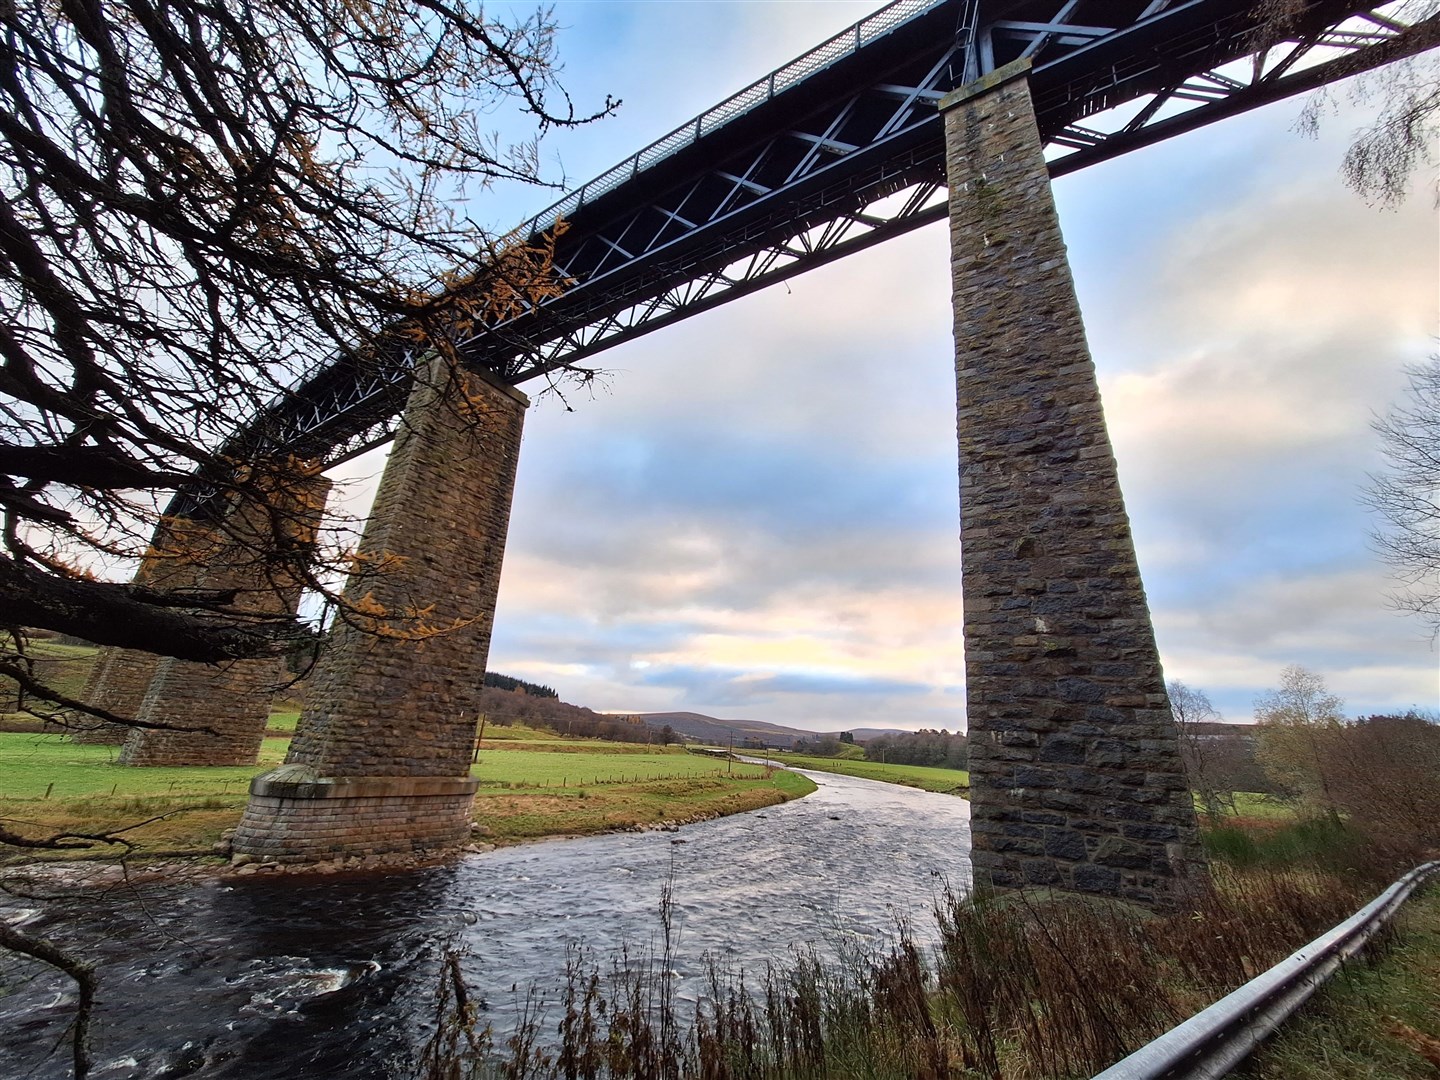 Passing below the railway viaduct at Tomatin.